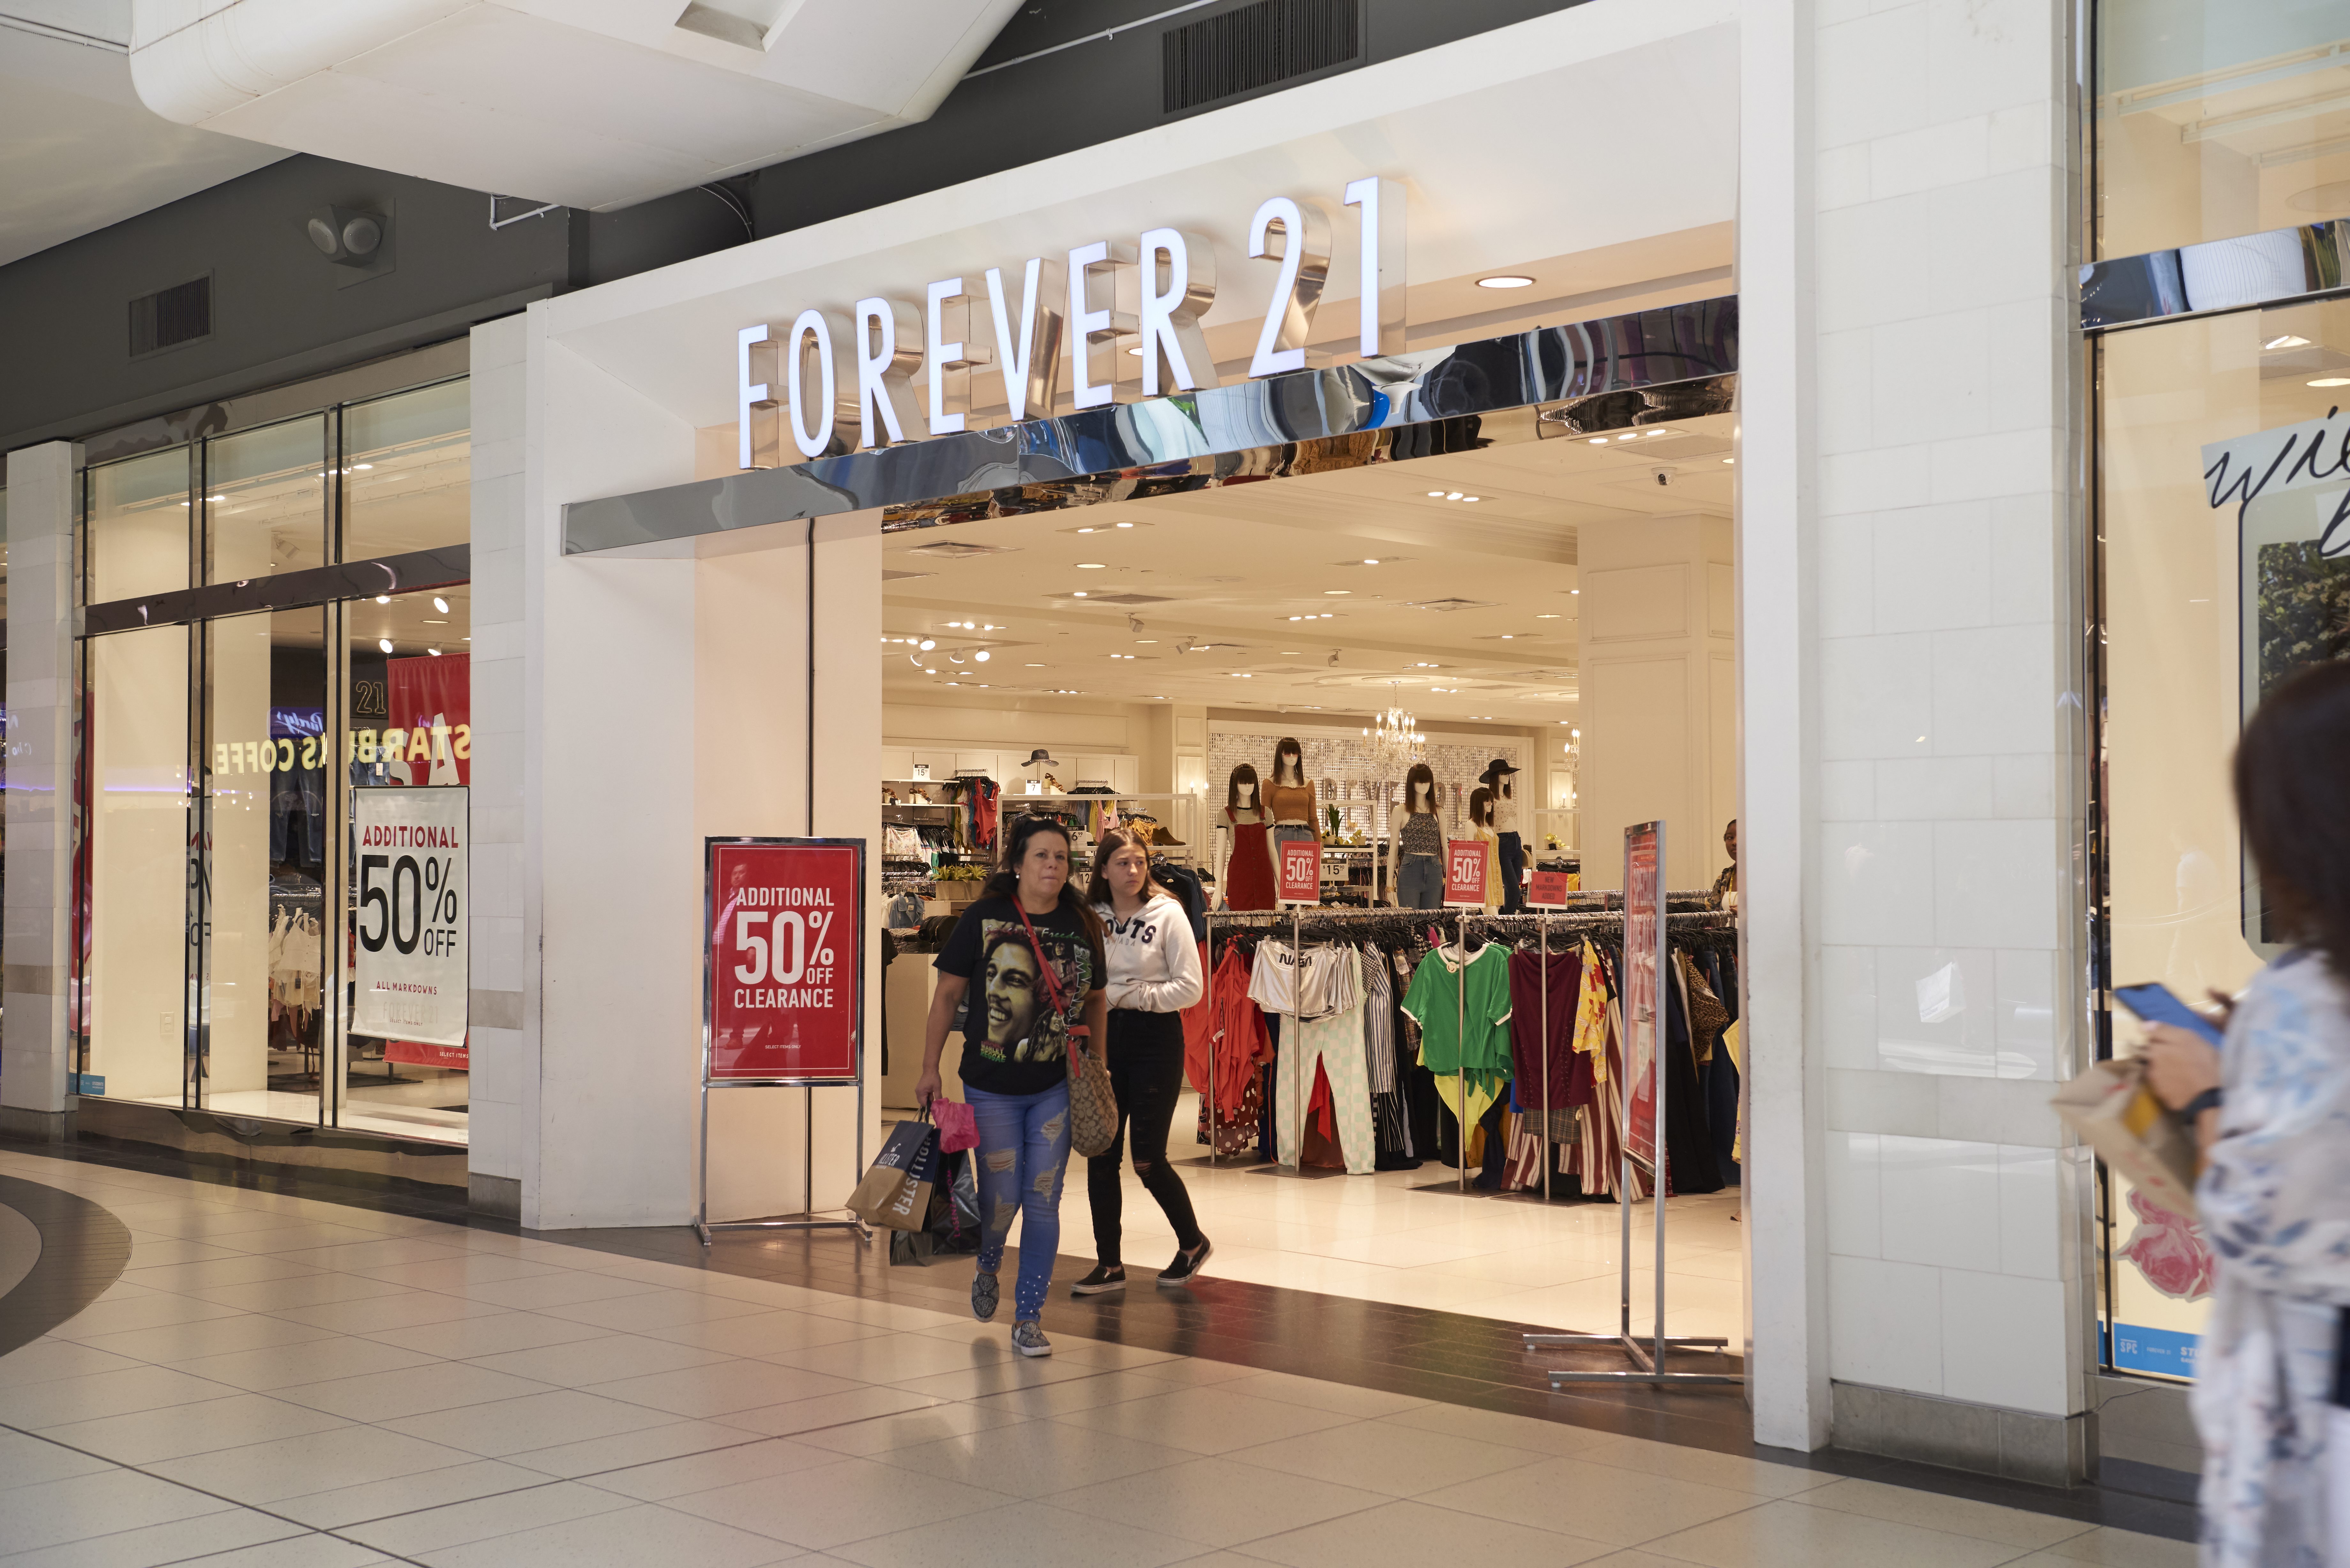 Forever 21 – Apps no Google Play